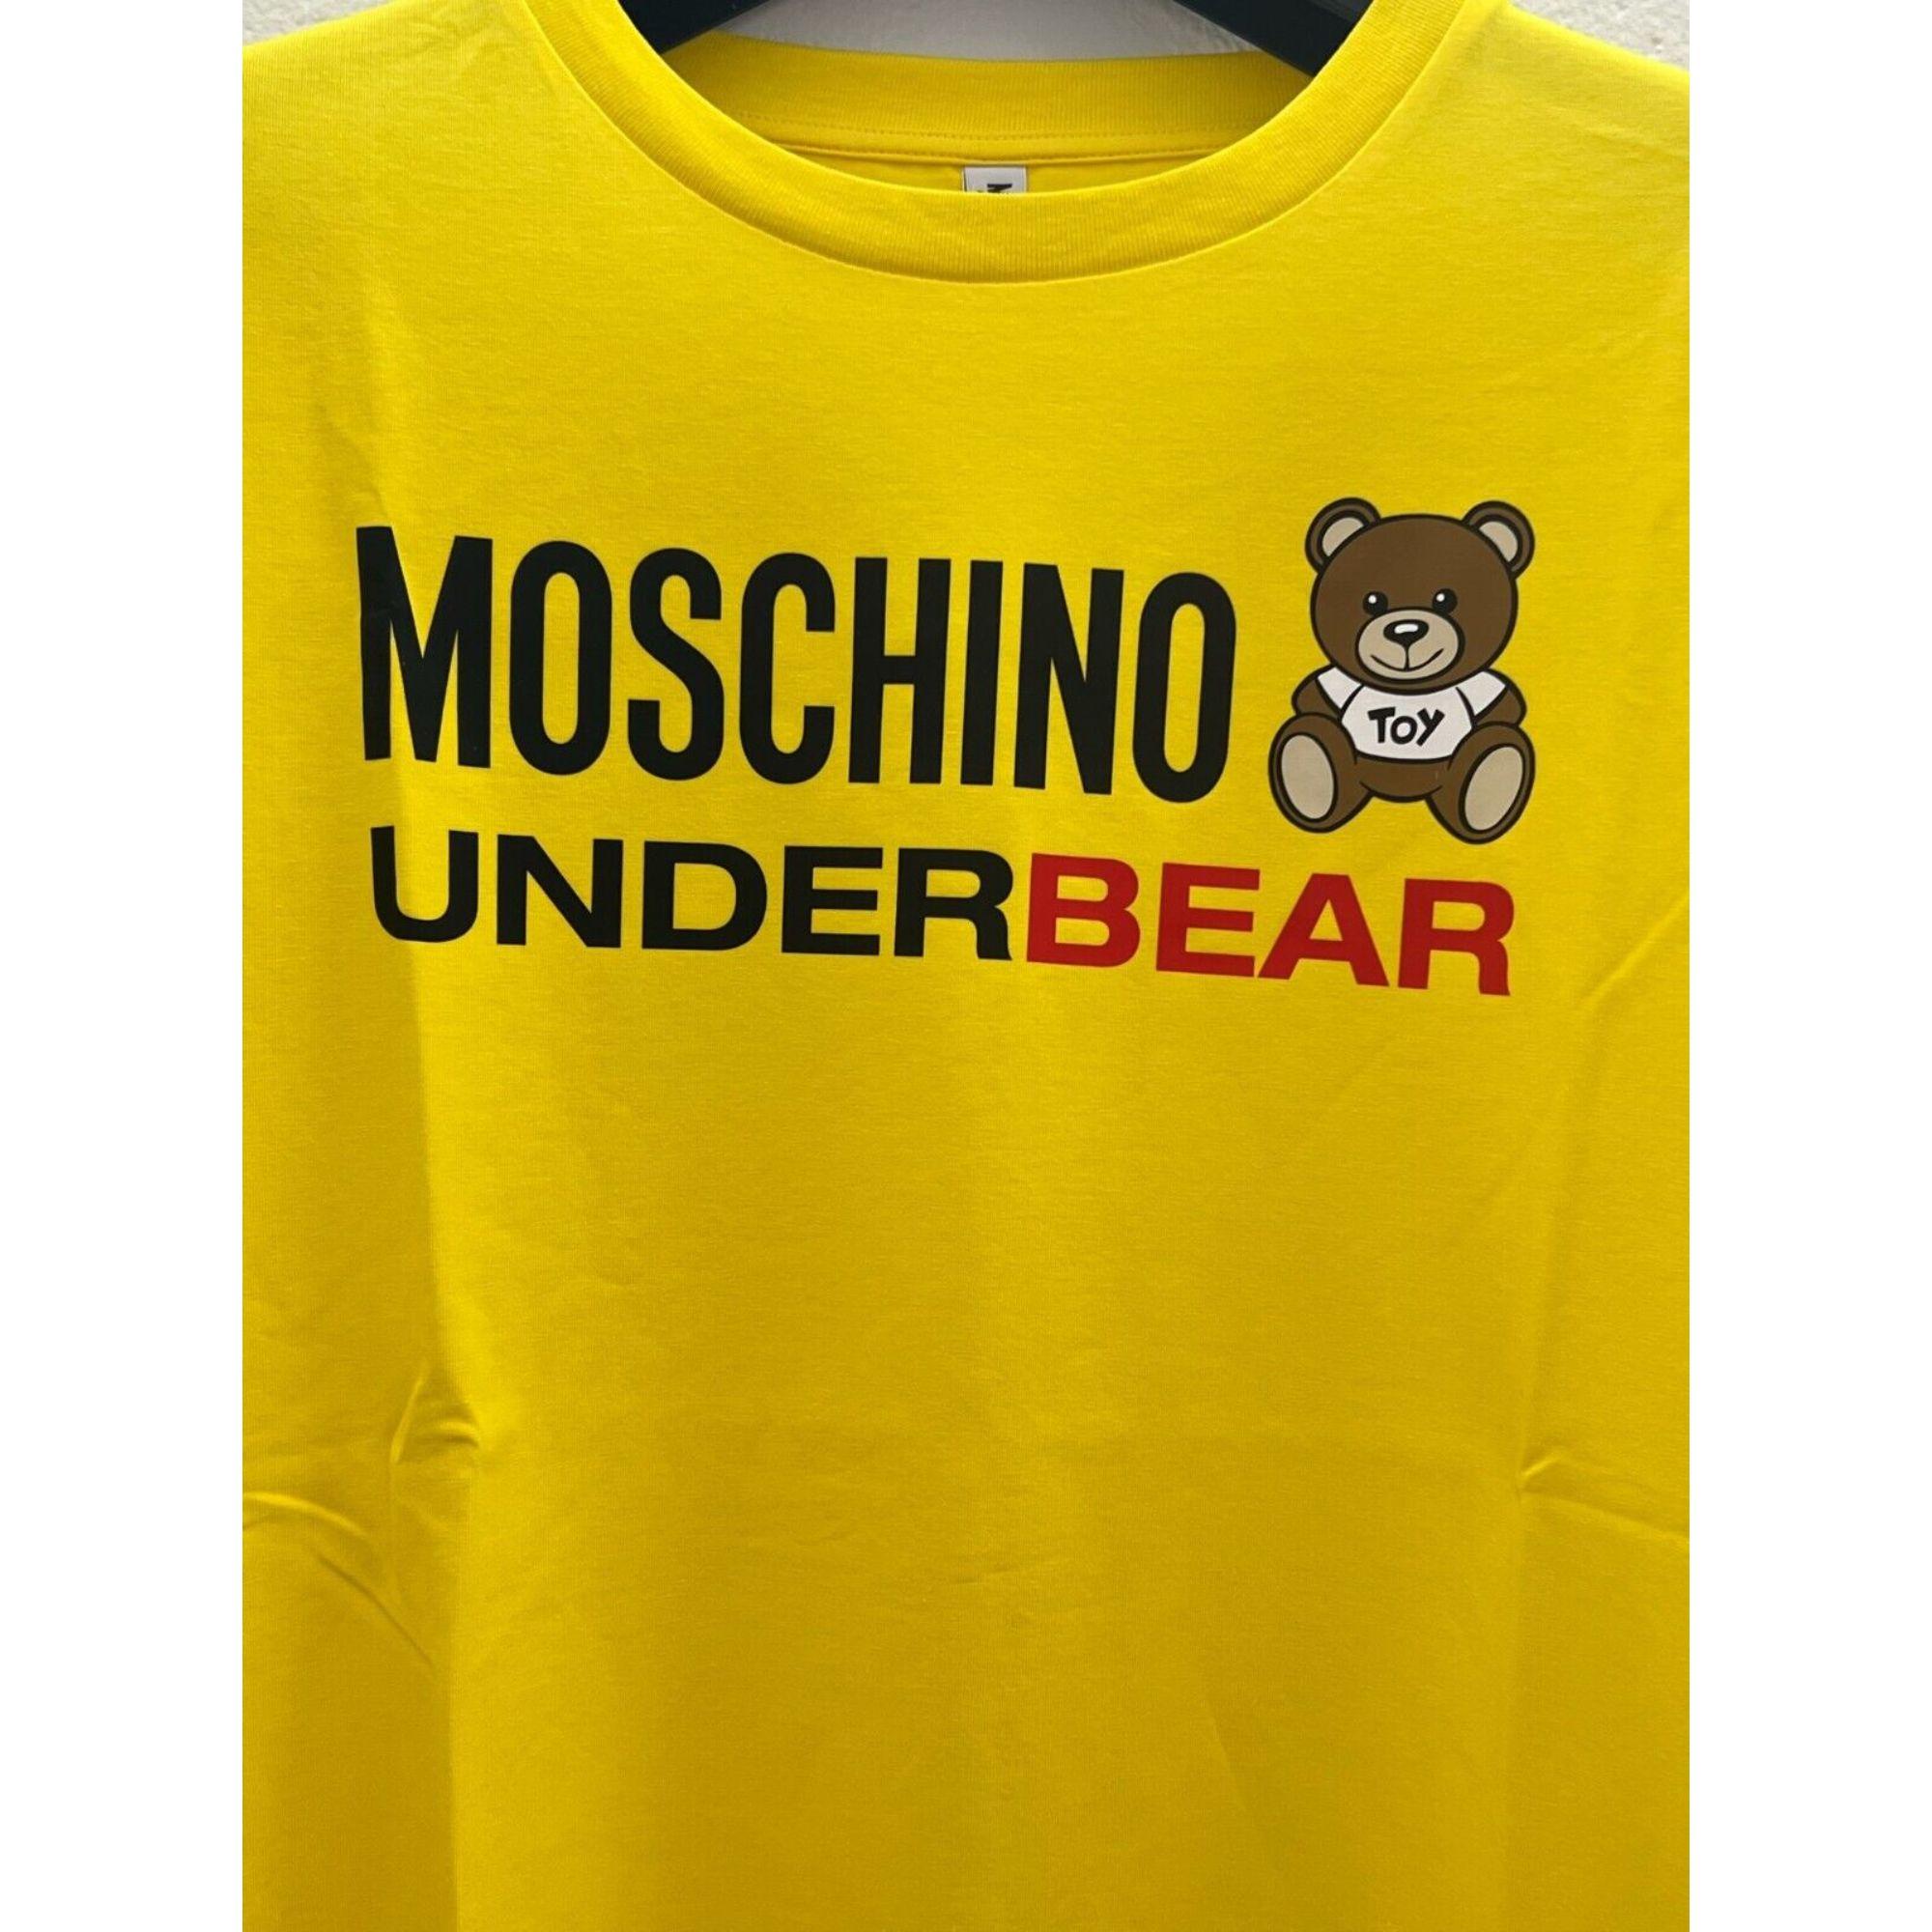 AW20 Moschino Underwear Jeremy Scott Yellow Underbear Teddy Bear Cotton T-shirt

Additional Information:
Material: 94% Cotton, 6% EA
Color: Yellow, White, Brown, Red
Size: S / US XS
Style: Basic
Pattern: Solid, Logo
Dimensions: Shoulder to shoulder